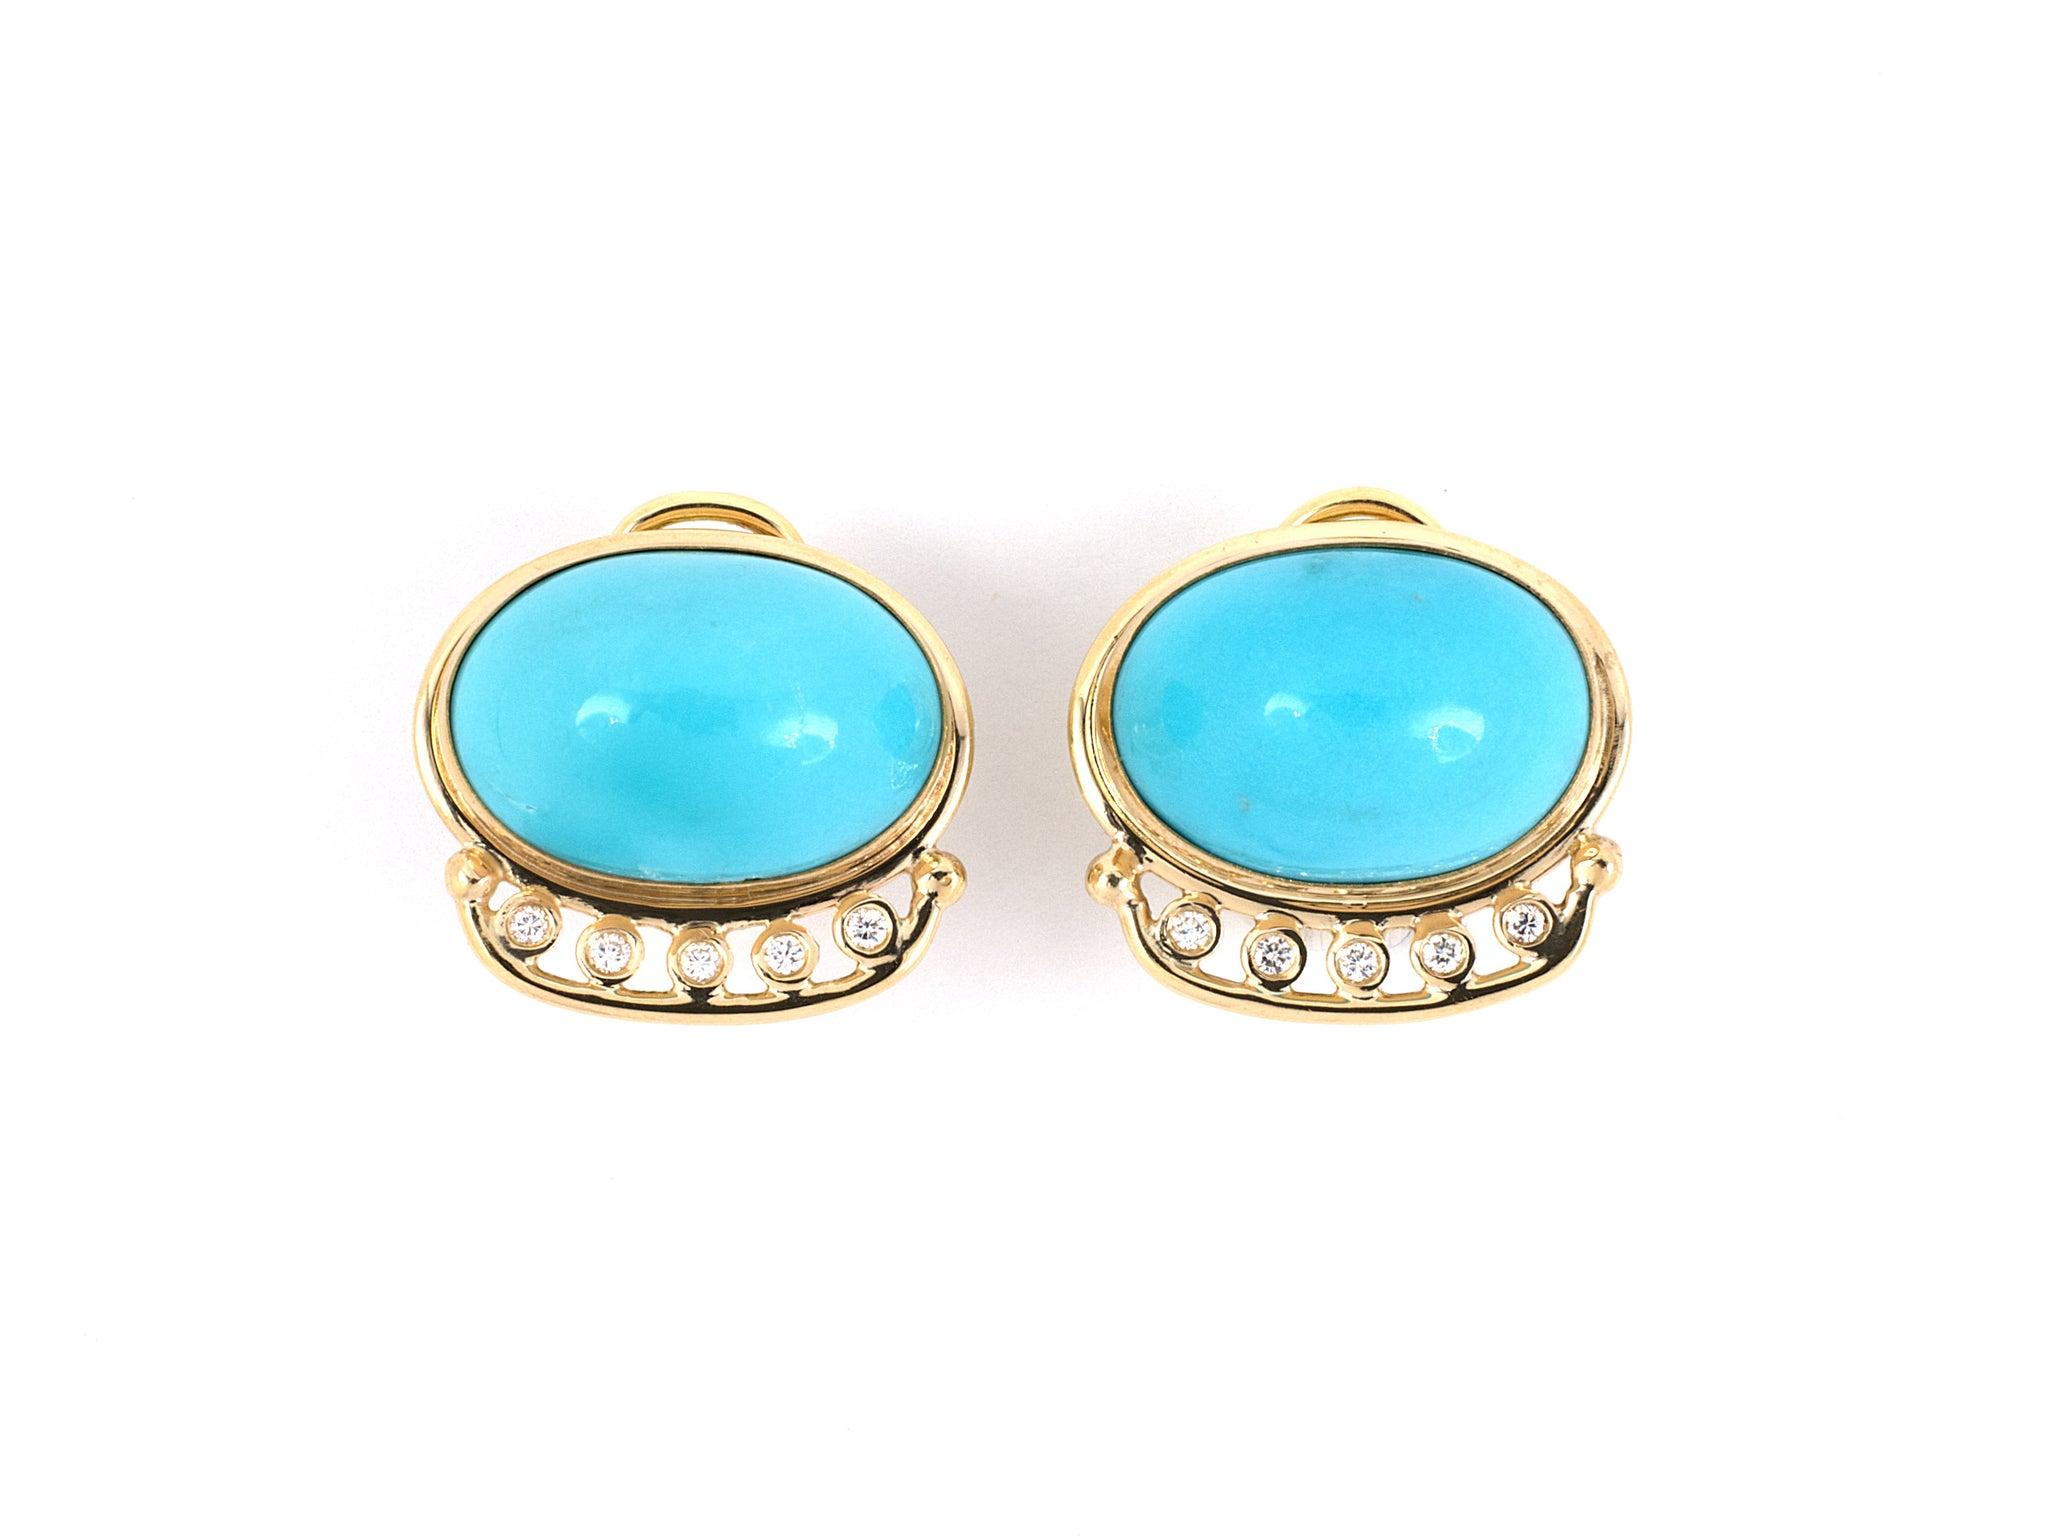 Estate Collection Joan Benjamin Turquoise Oval Earrings